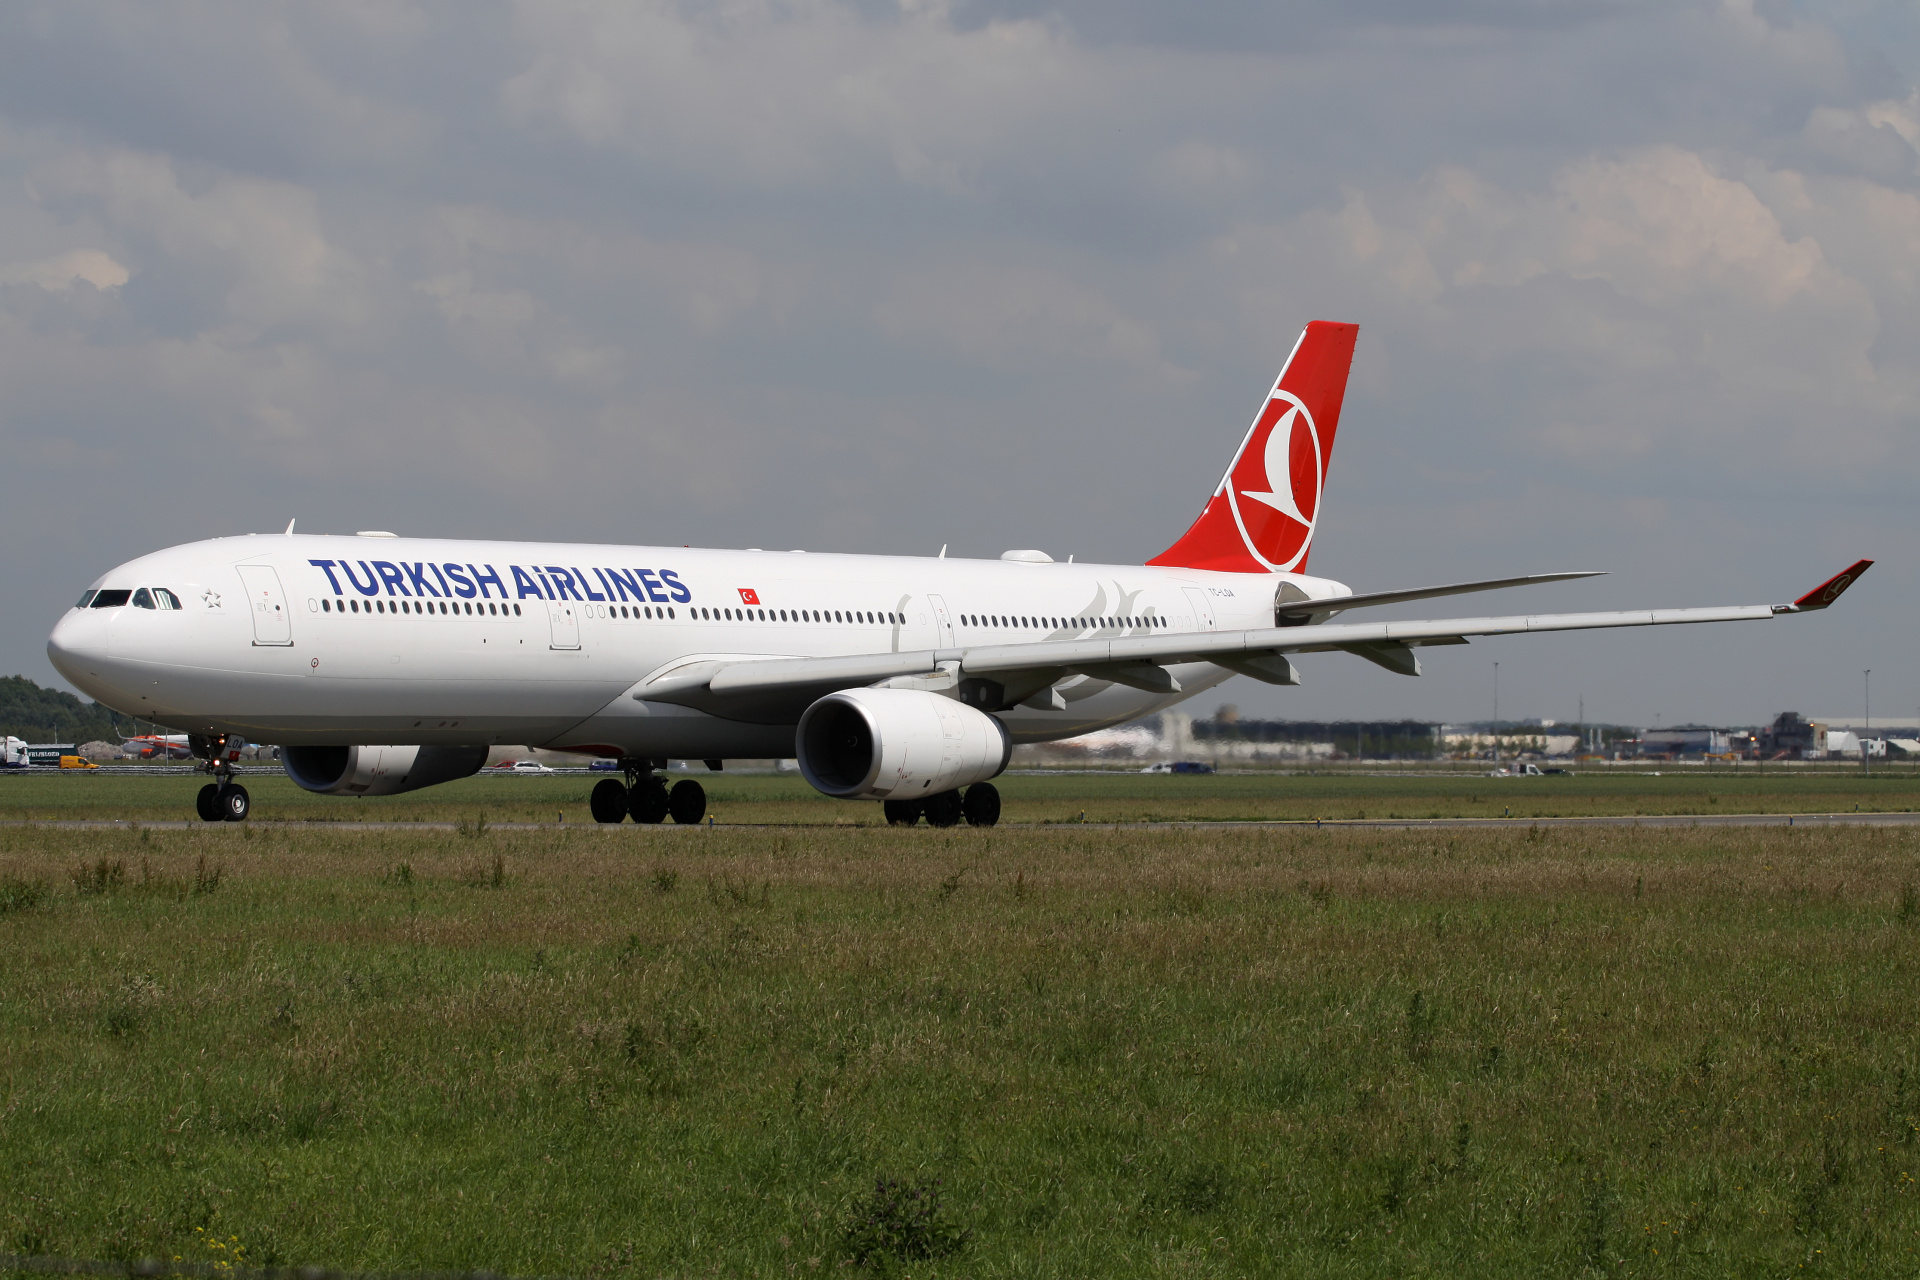 TC-LOA, THY Turkish Airlines (Aircraft » Schiphol Spotting » Airbus A330-300)